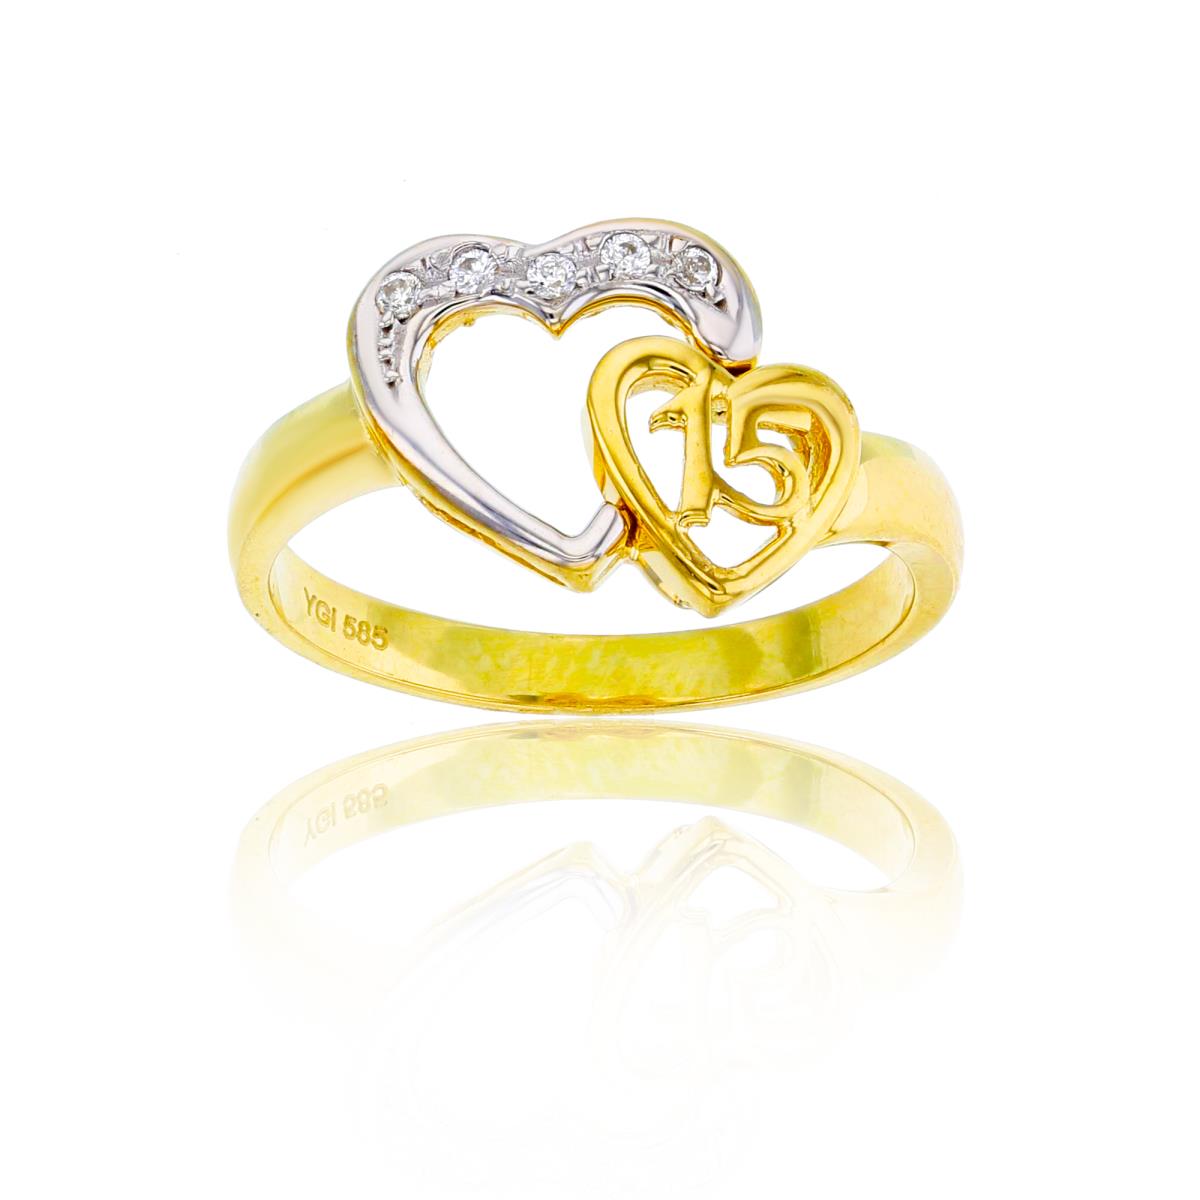 14K Yellow & White Gold CZ "15" Anos Hearts Ring